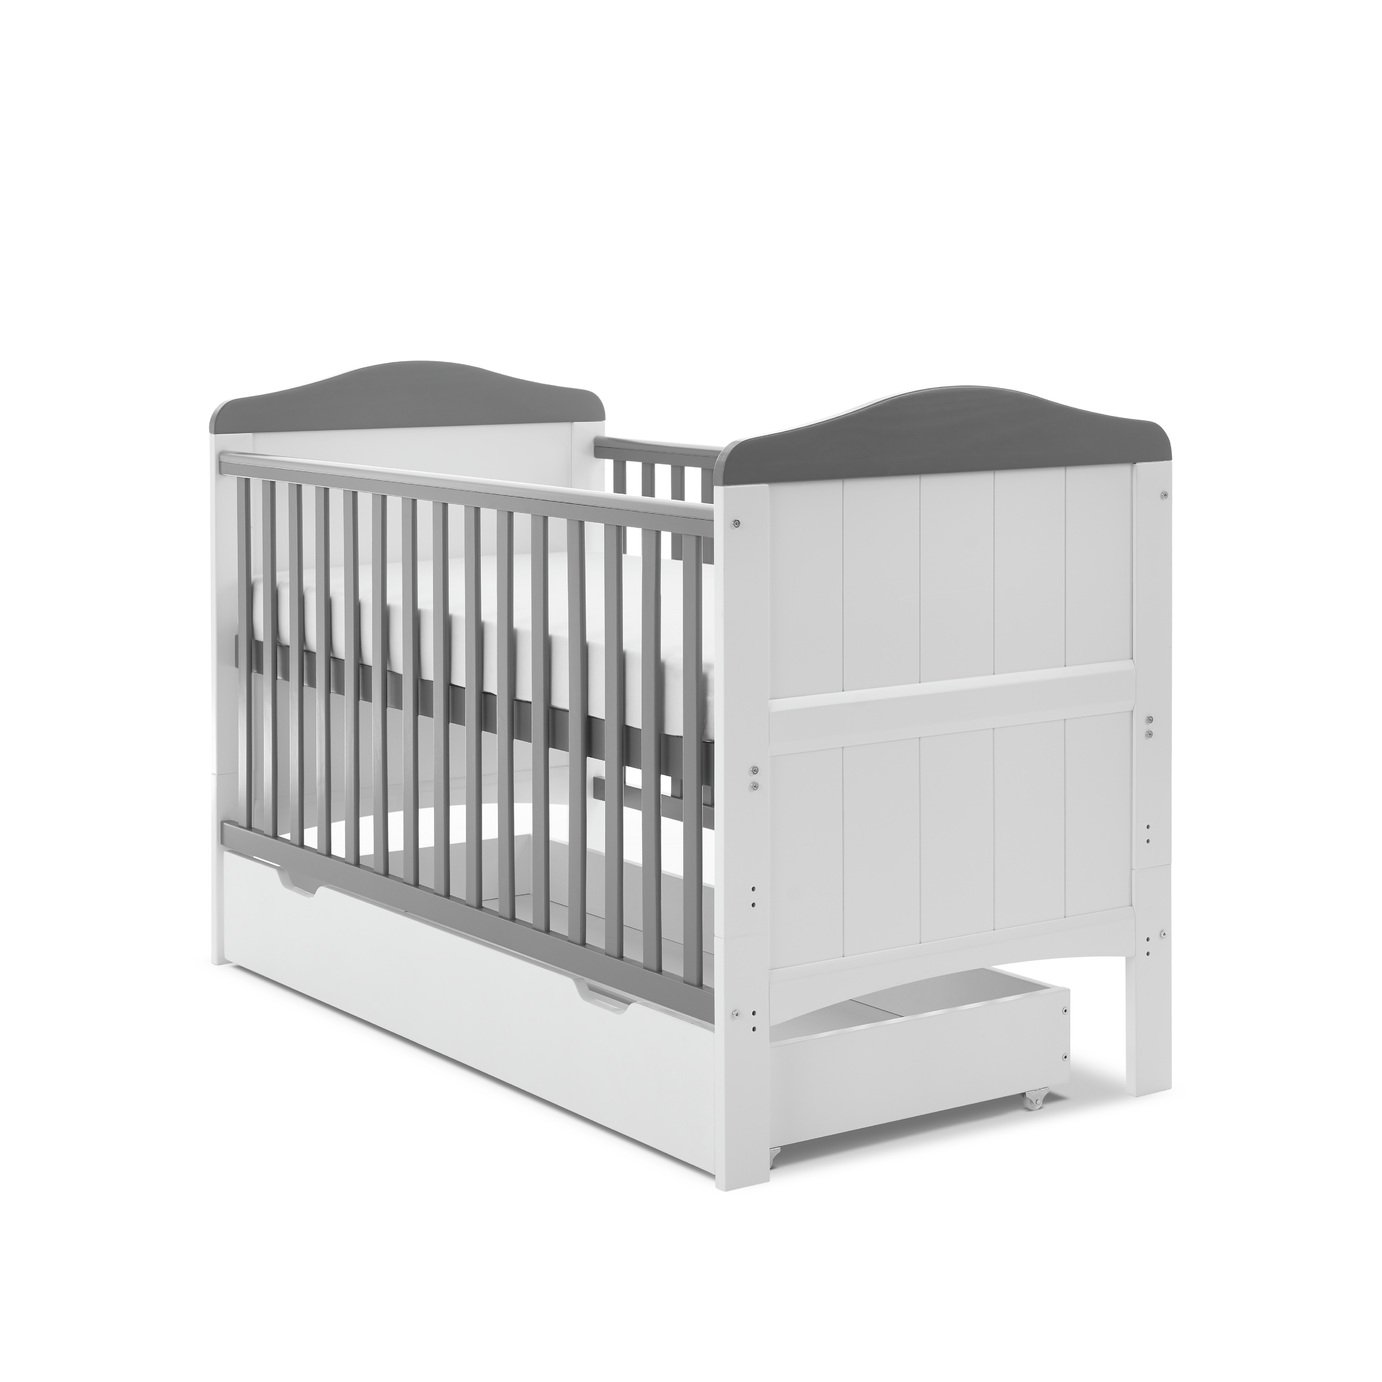 Obaby Whitby Cot Bed Review